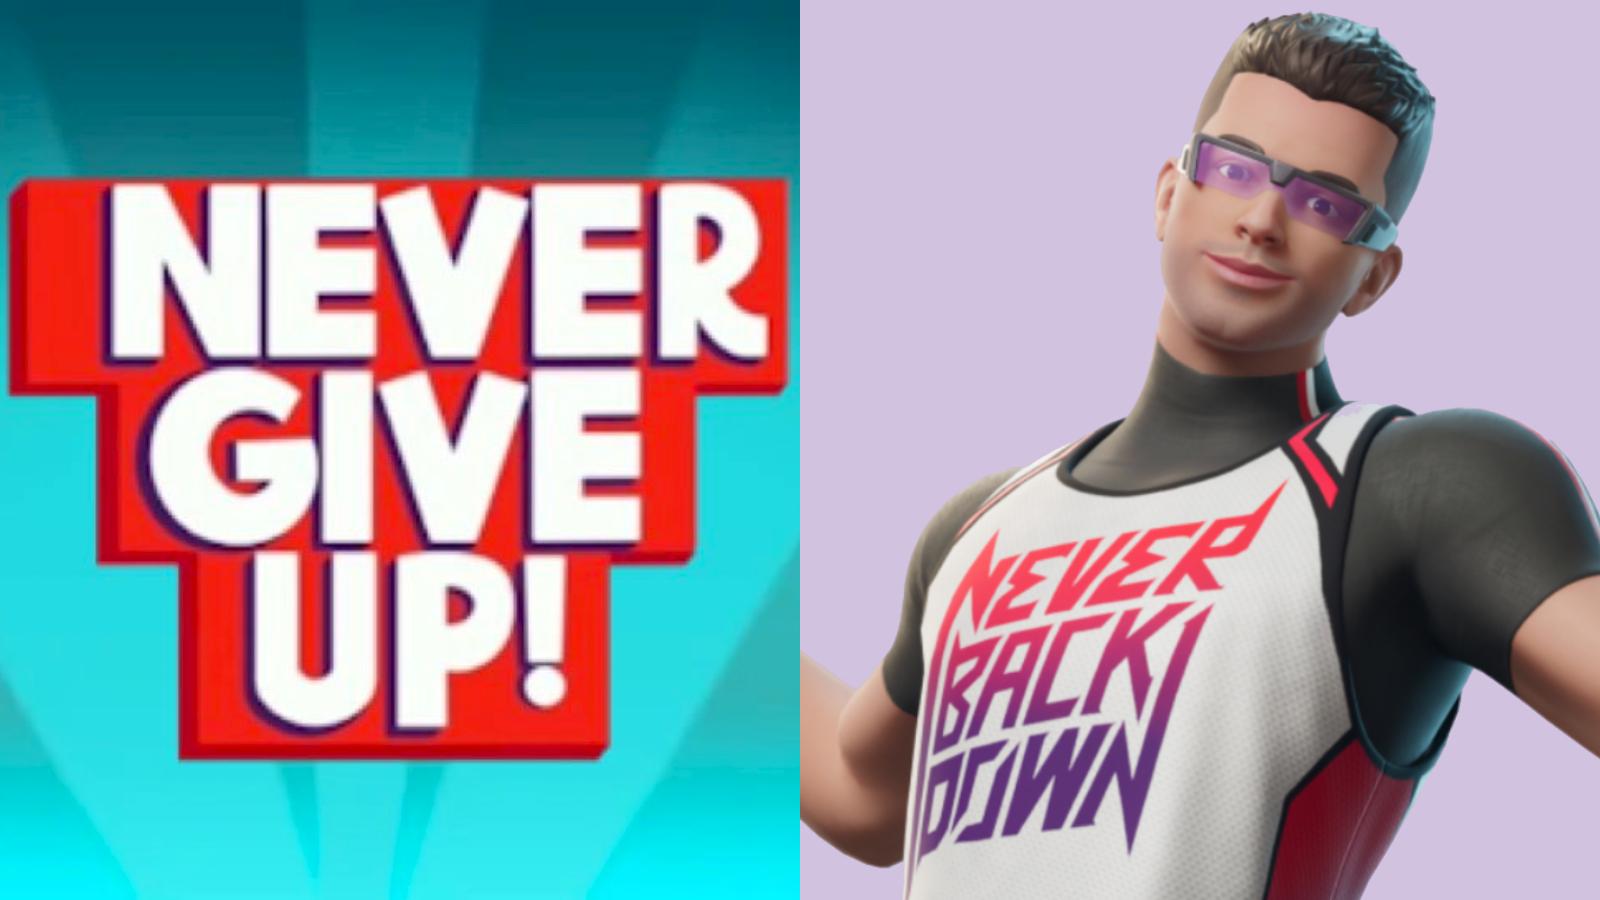 Nick Eh 30 Never Give Up Fortnite free emoticon.